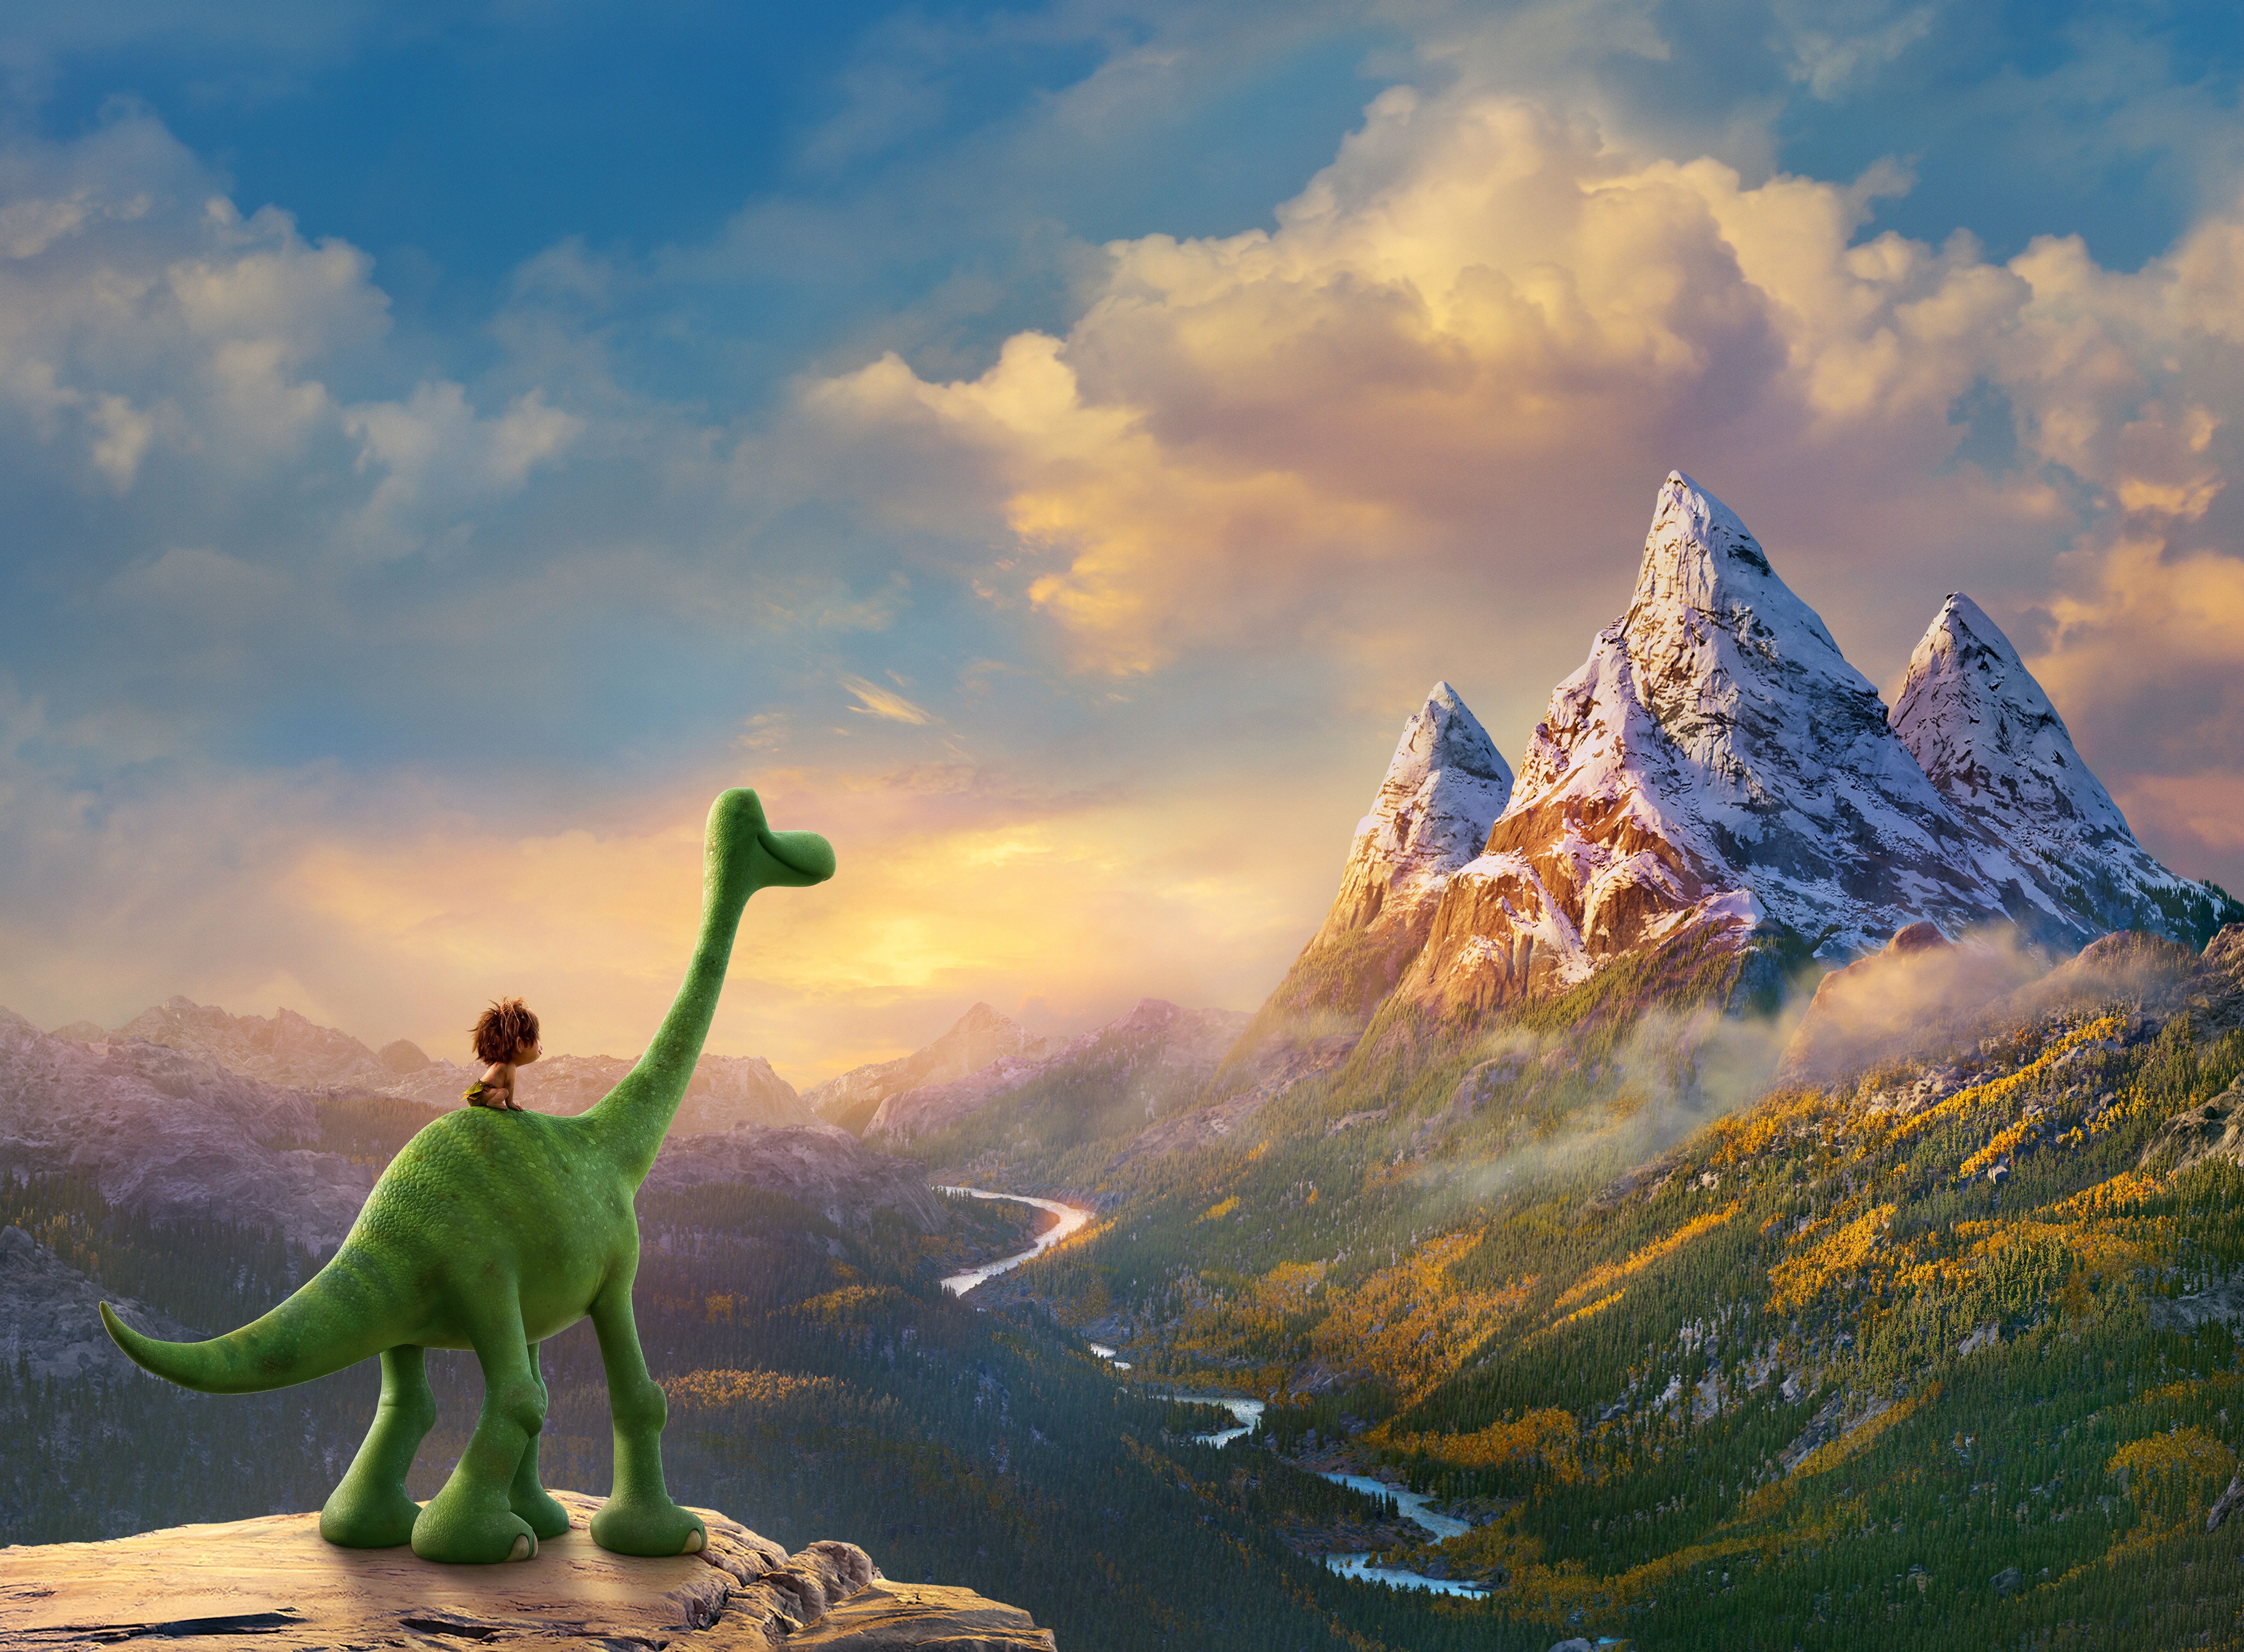 Dinosaurs Movies The Good Dinosaur CGi Mountains Clouds Landscape Sunset Glow 5000x3682